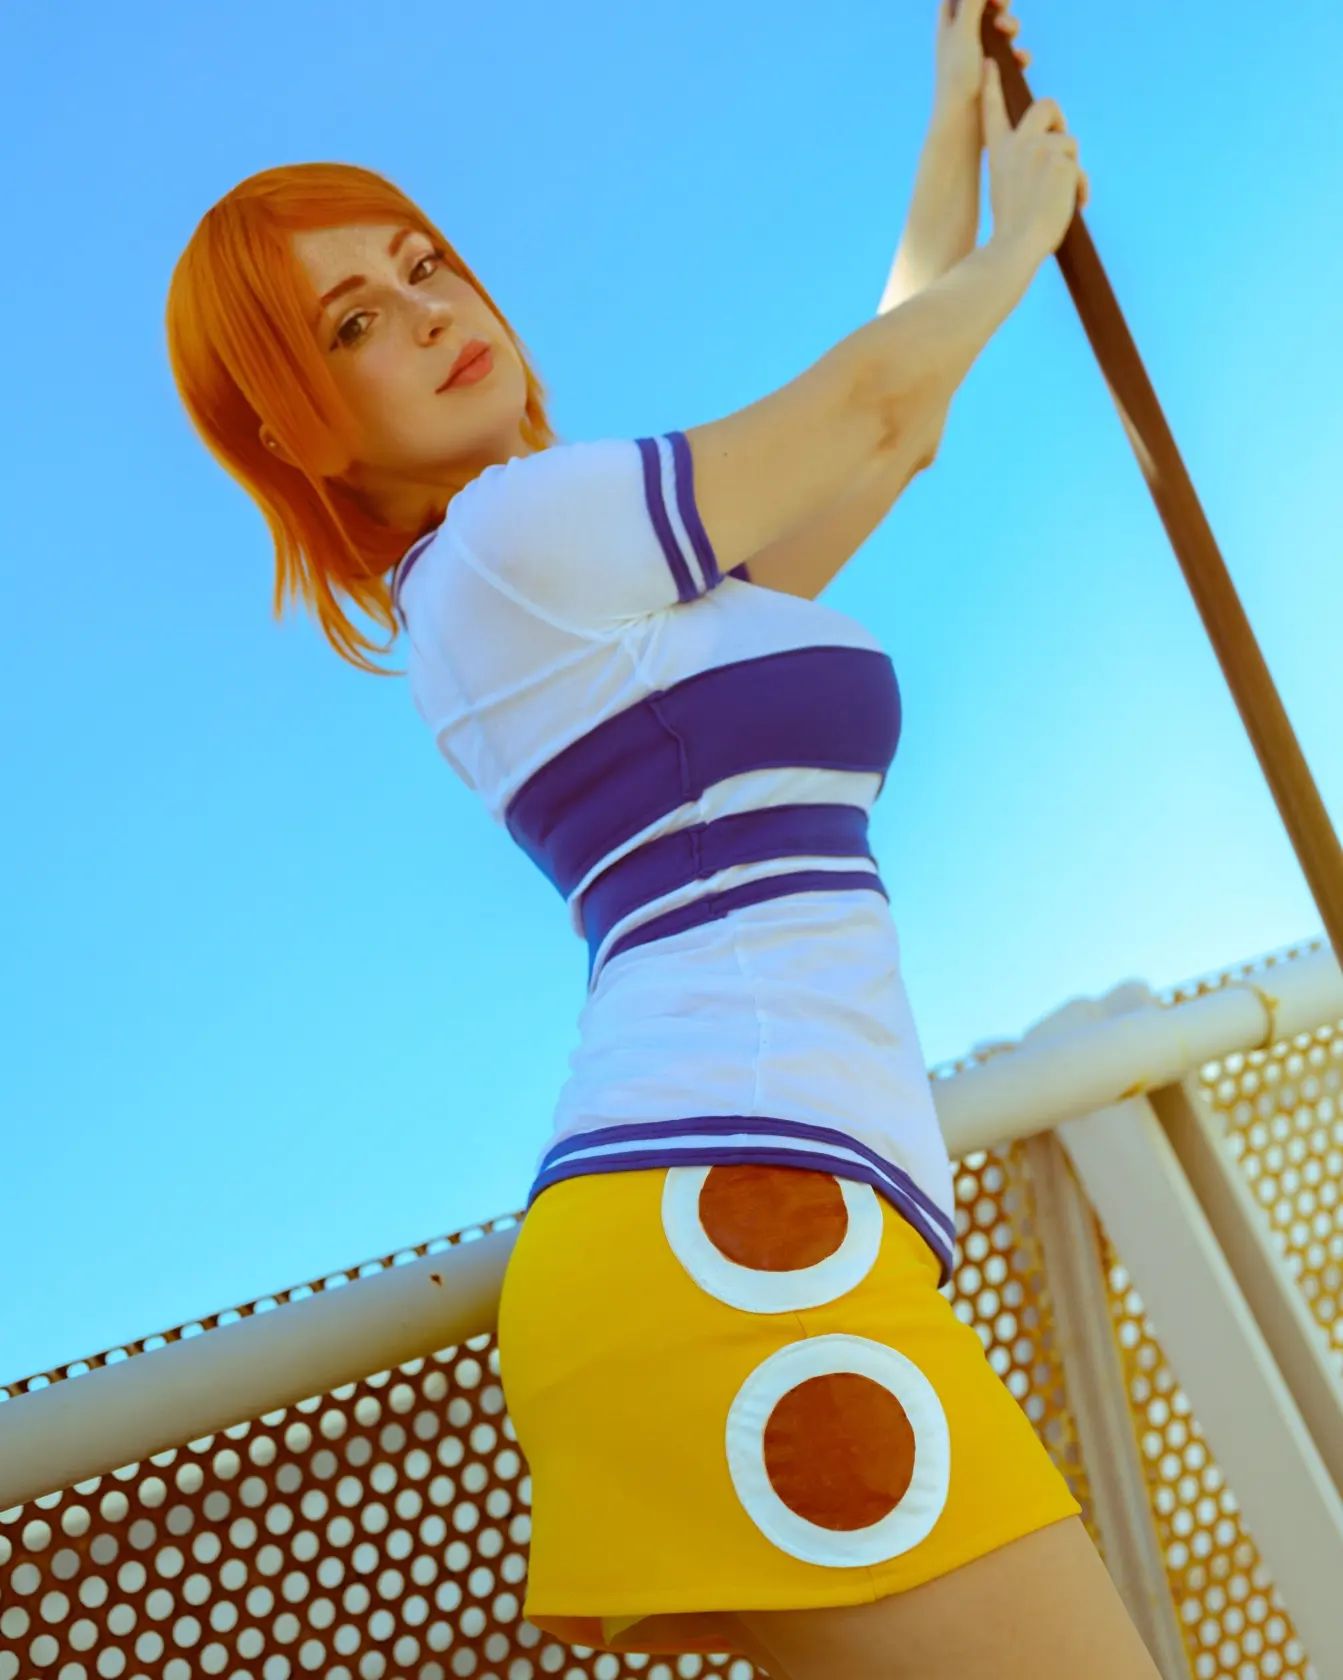 Are you excited for the One Piece anime remake announced from WIT Studio? 😍❤️ I can’t wait for it 🥹💓

#nami #namionepiece #namicosplay #onepiececosplay #onepiece